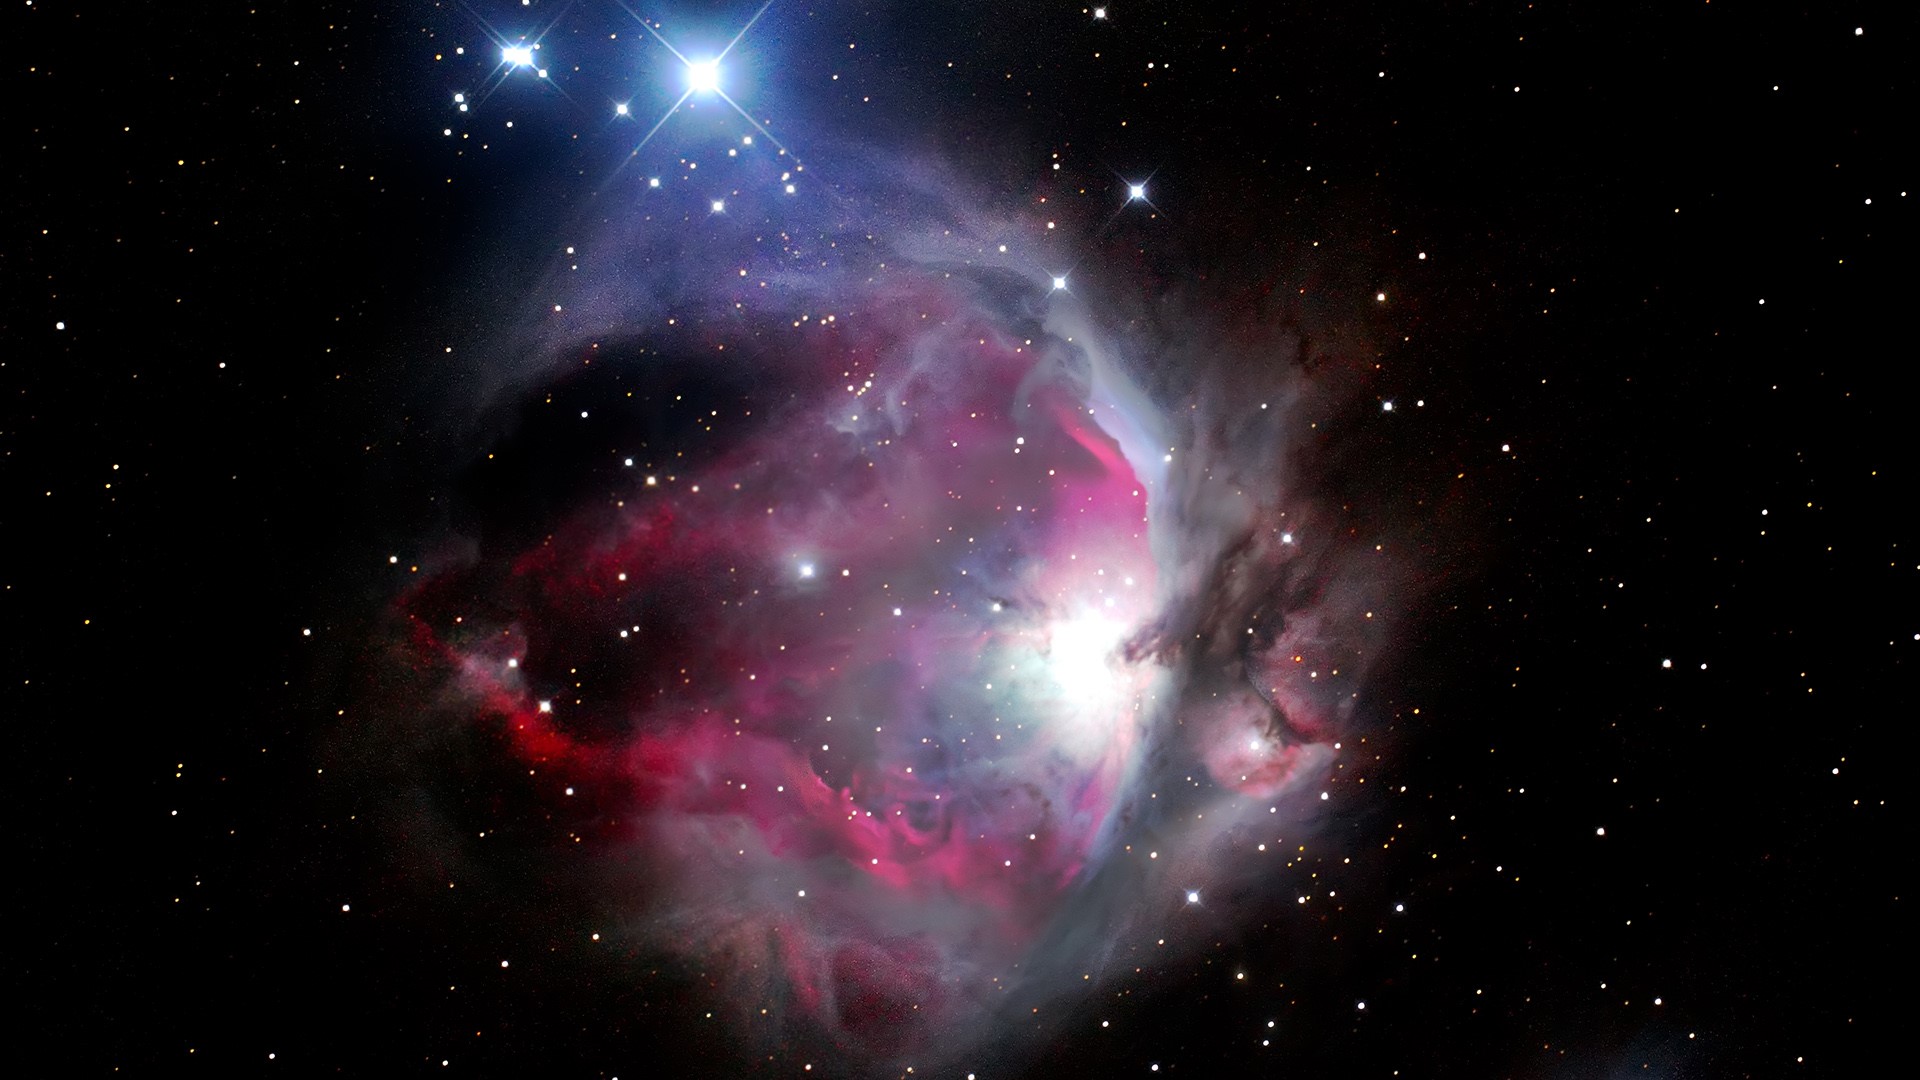 Orion Nebula NGC 1976 in the constellation of Orion situated in the ...